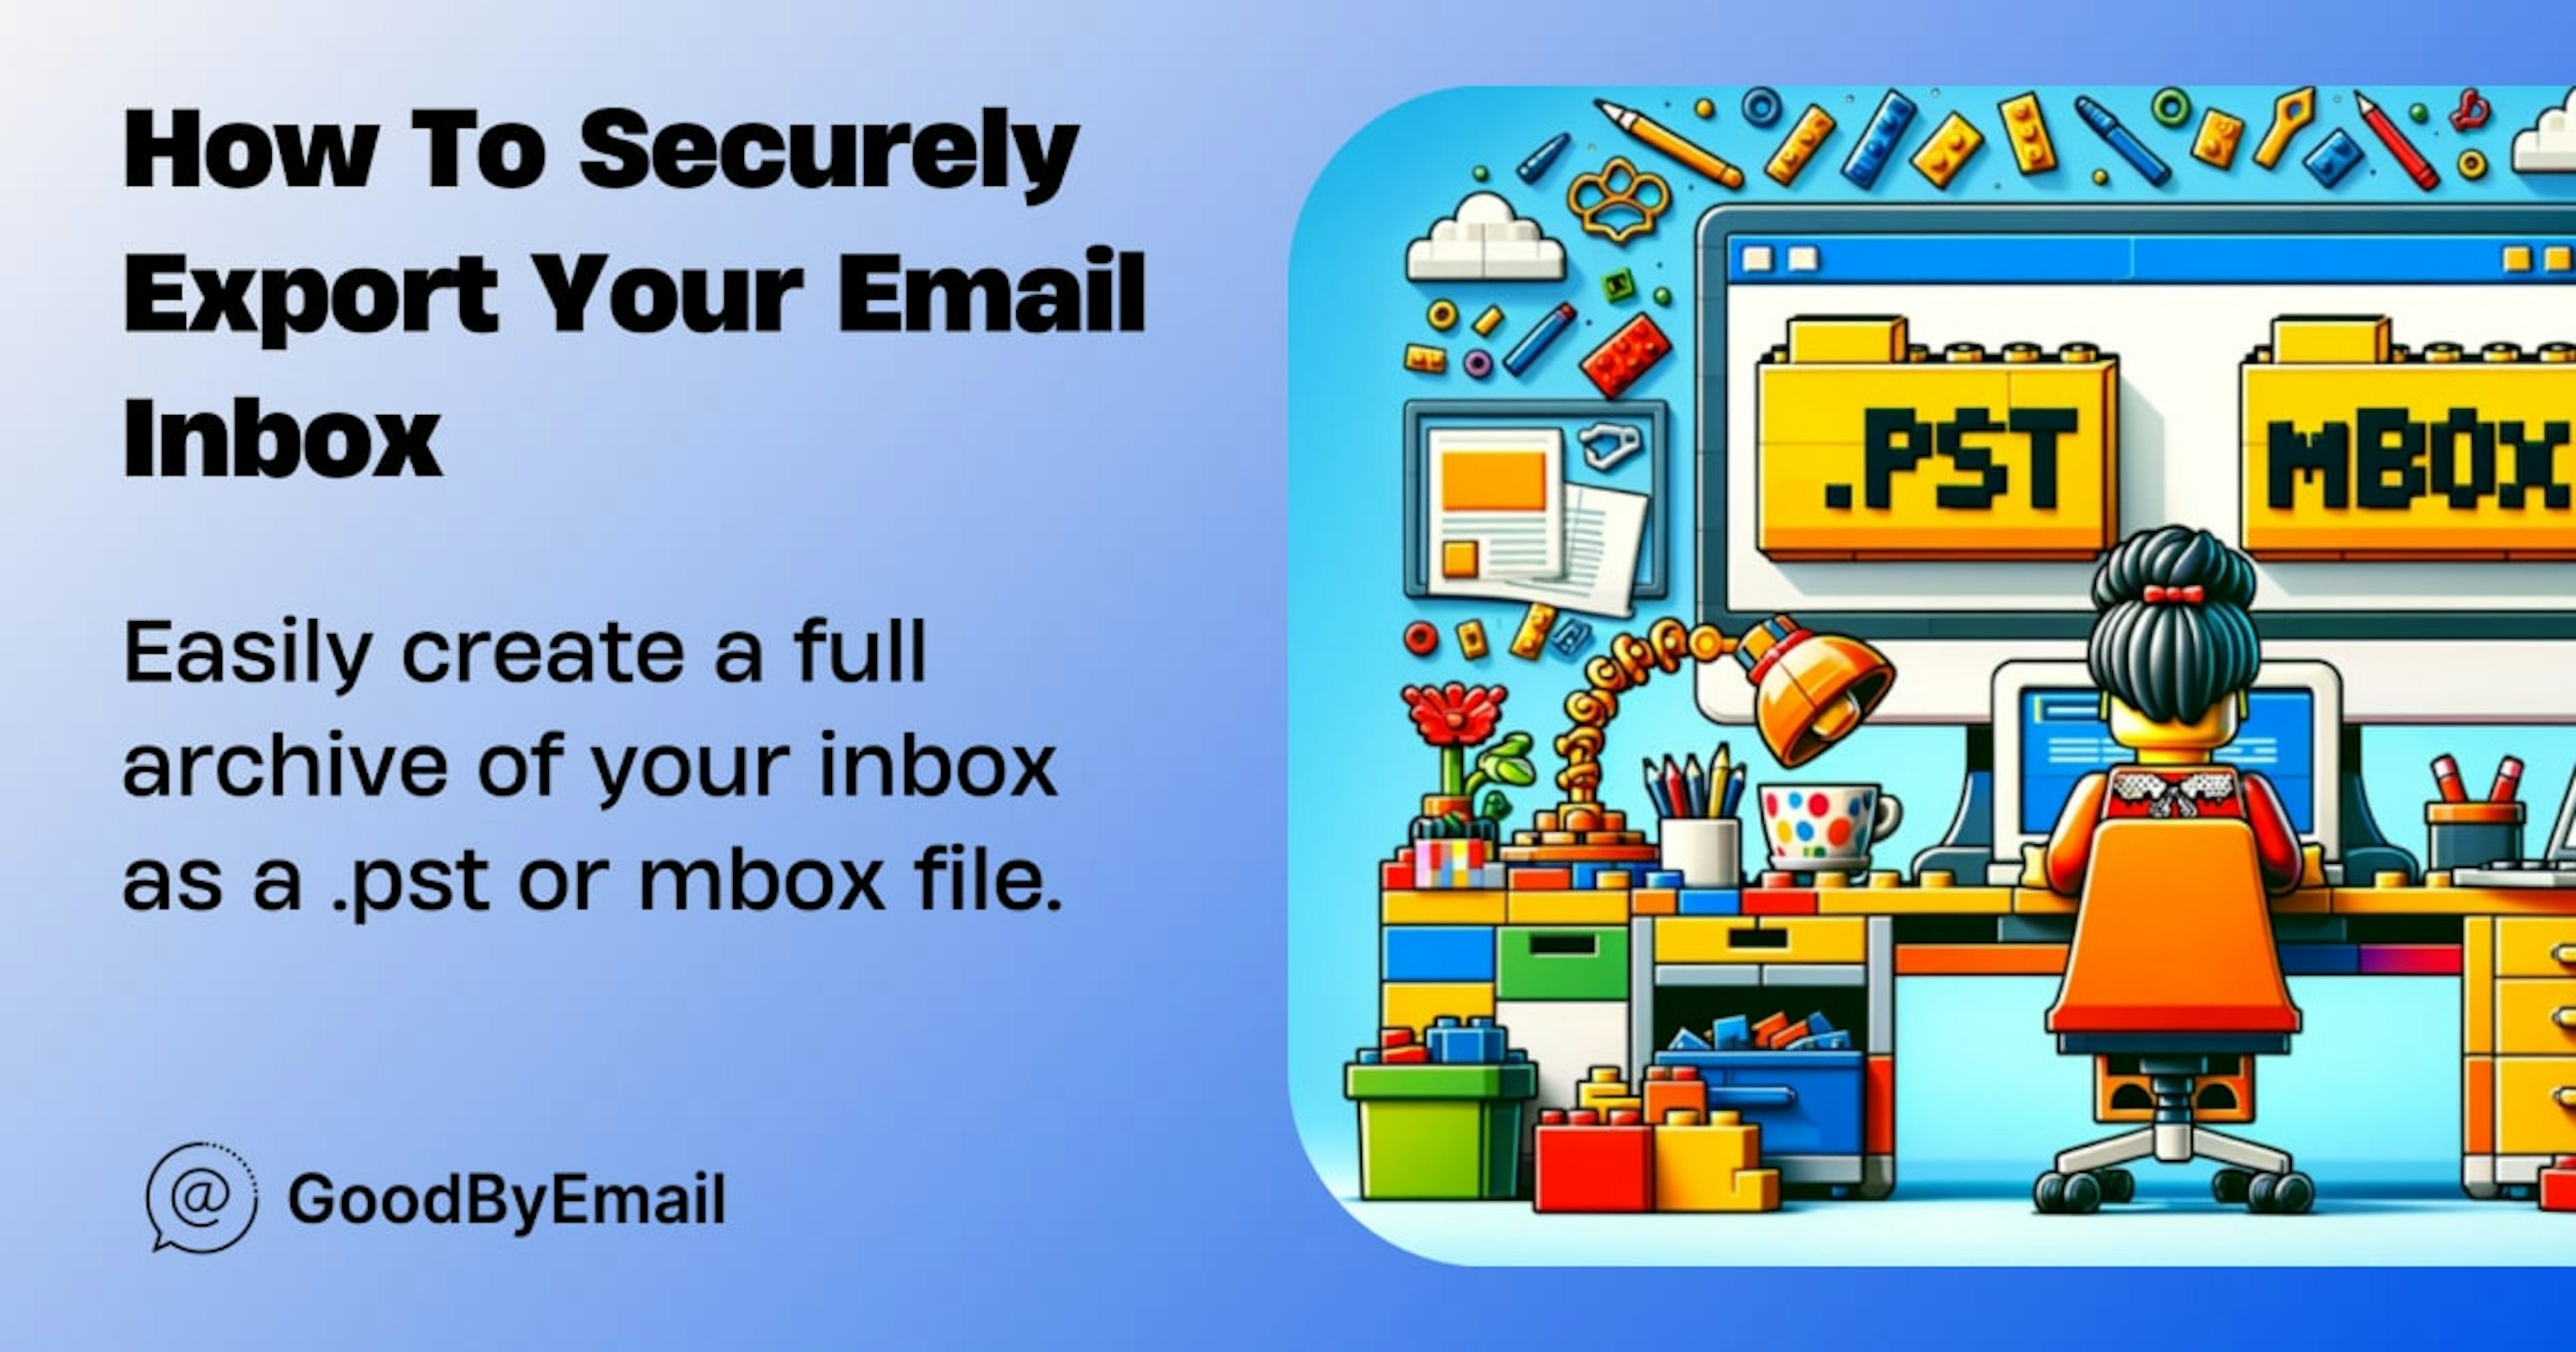 How to export any email inbox into mbox securely maintaining full privacy and not giving data away to third-parties